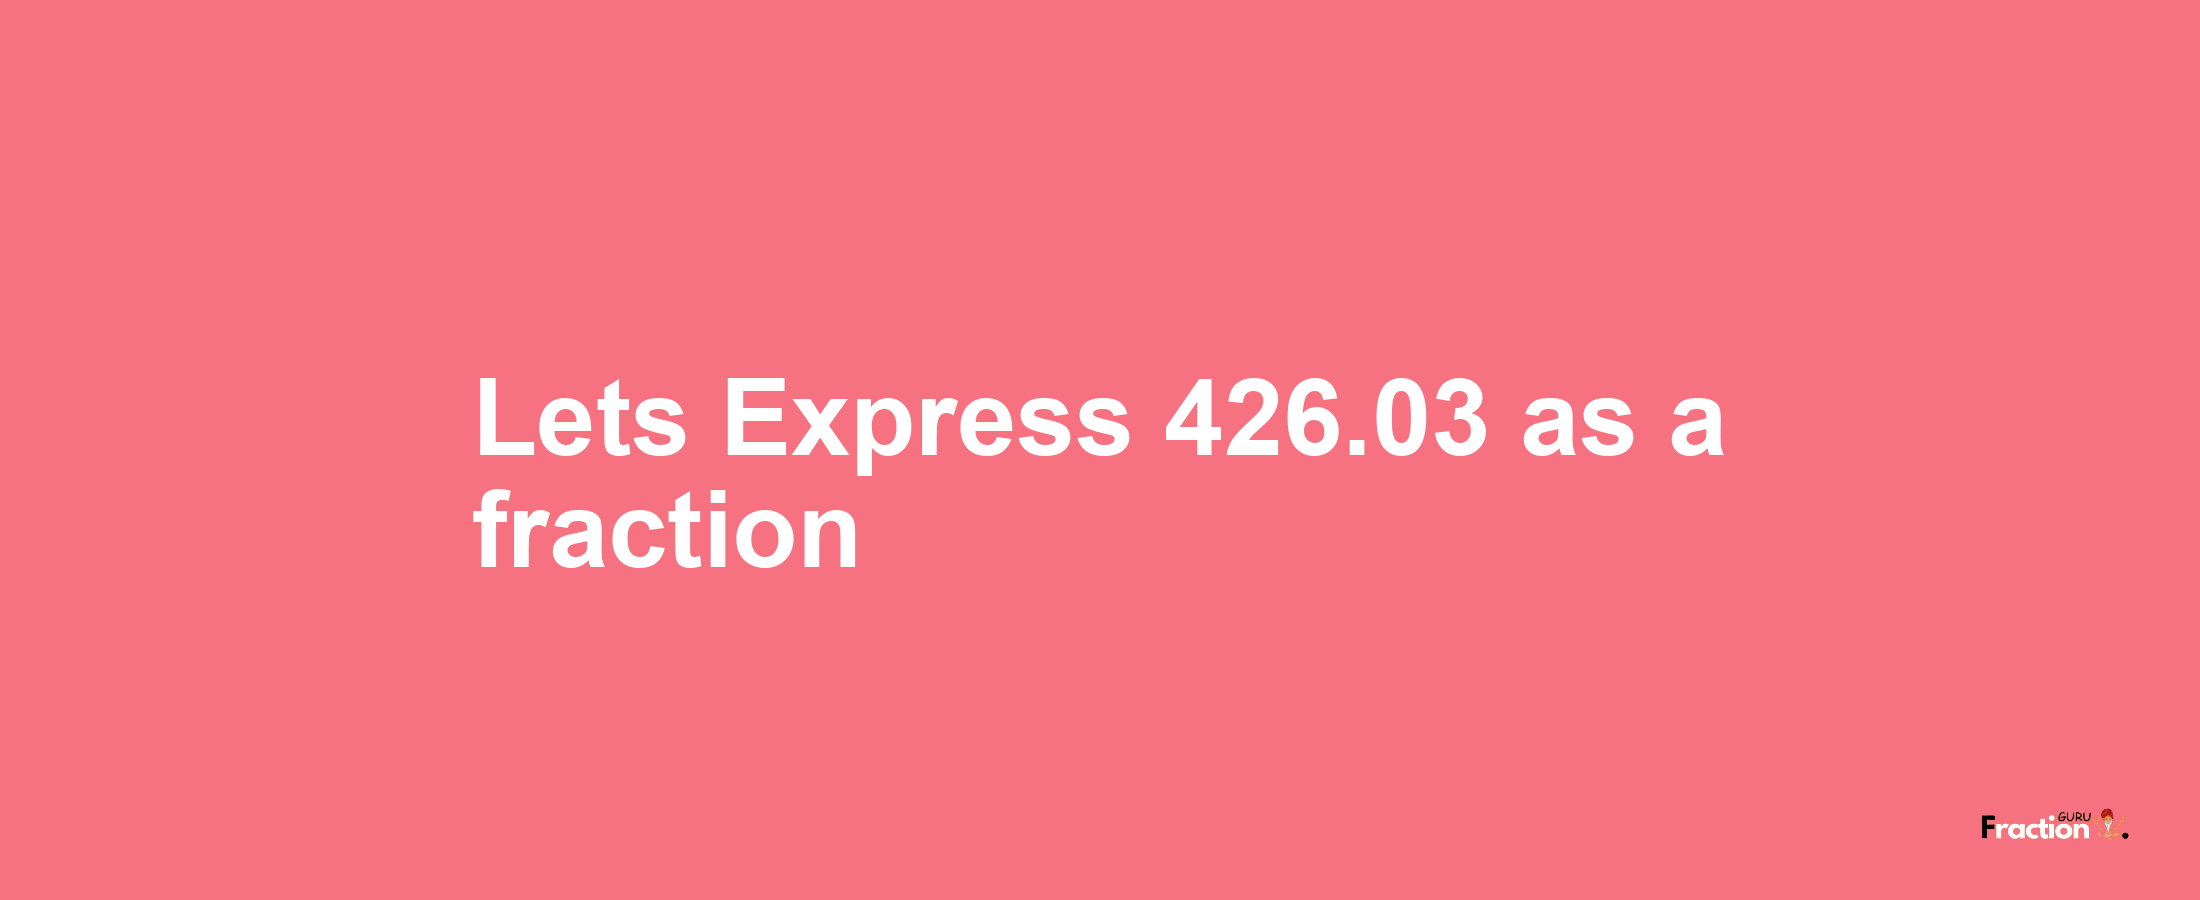 Lets Express 426.03 as afraction